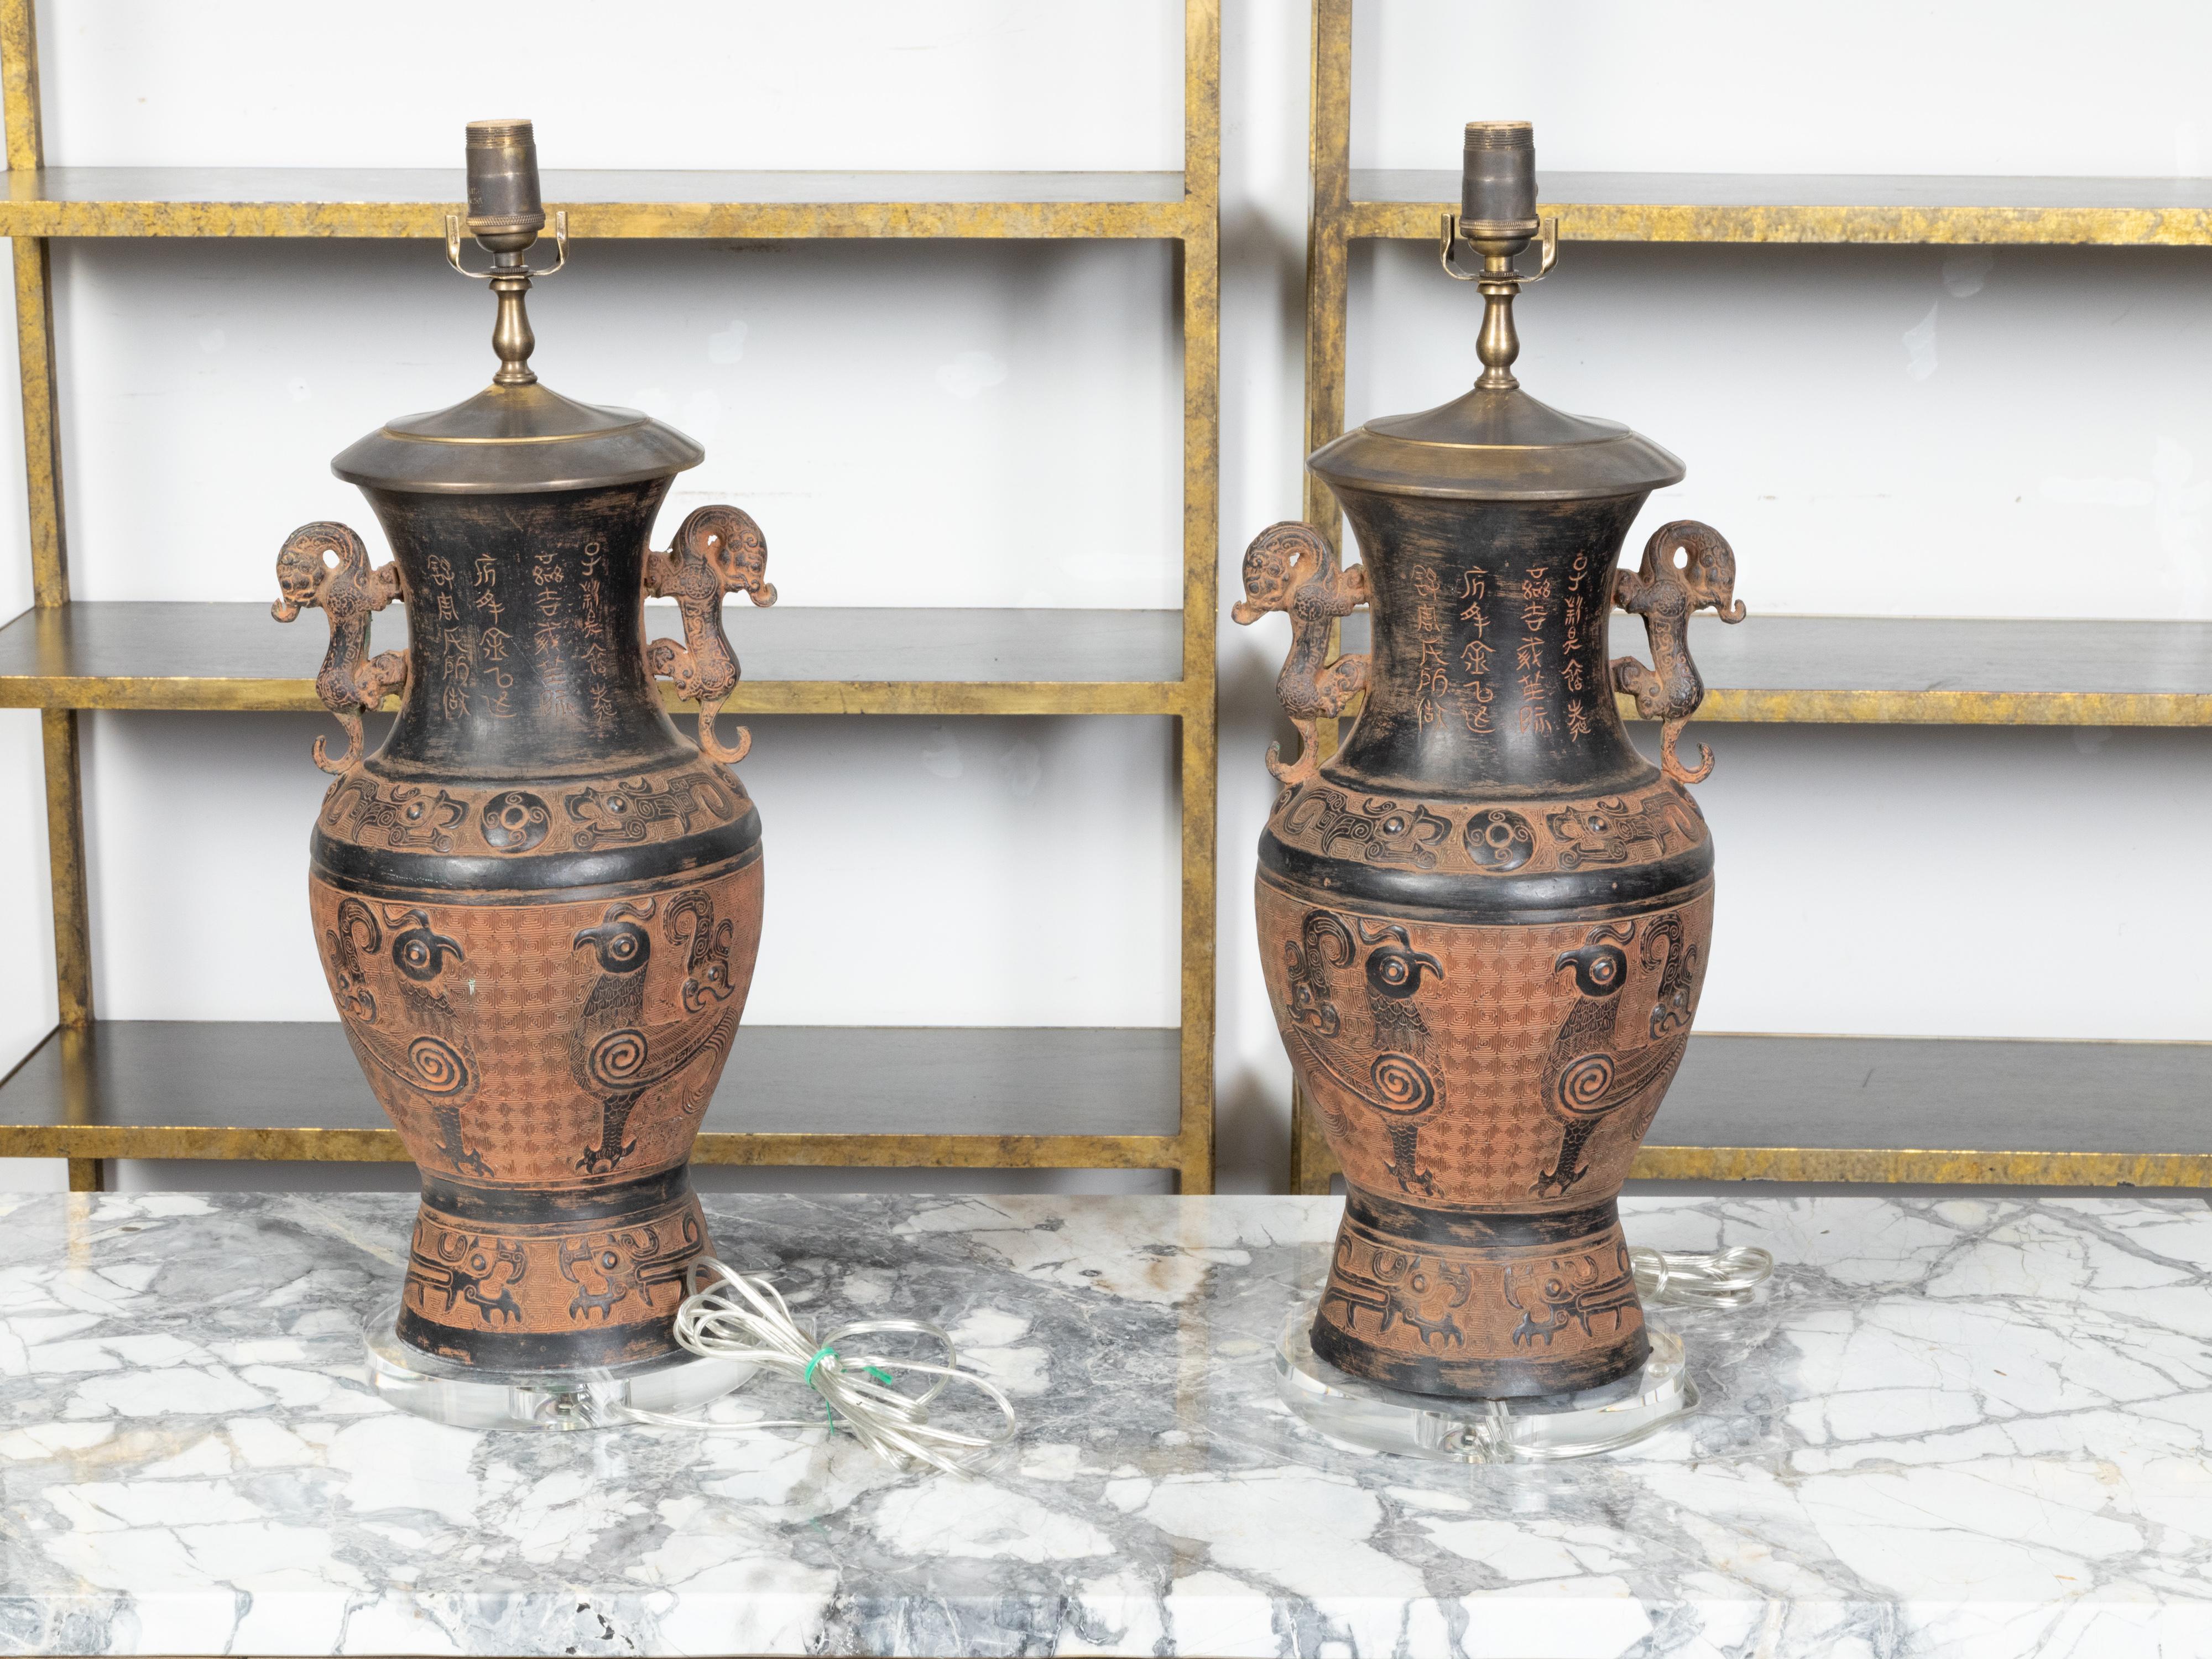 Pair of Asian Midcentury Bronze Urn-Shaped Table Lamps with Rooster and Meander In Good Condition For Sale In Atlanta, GA